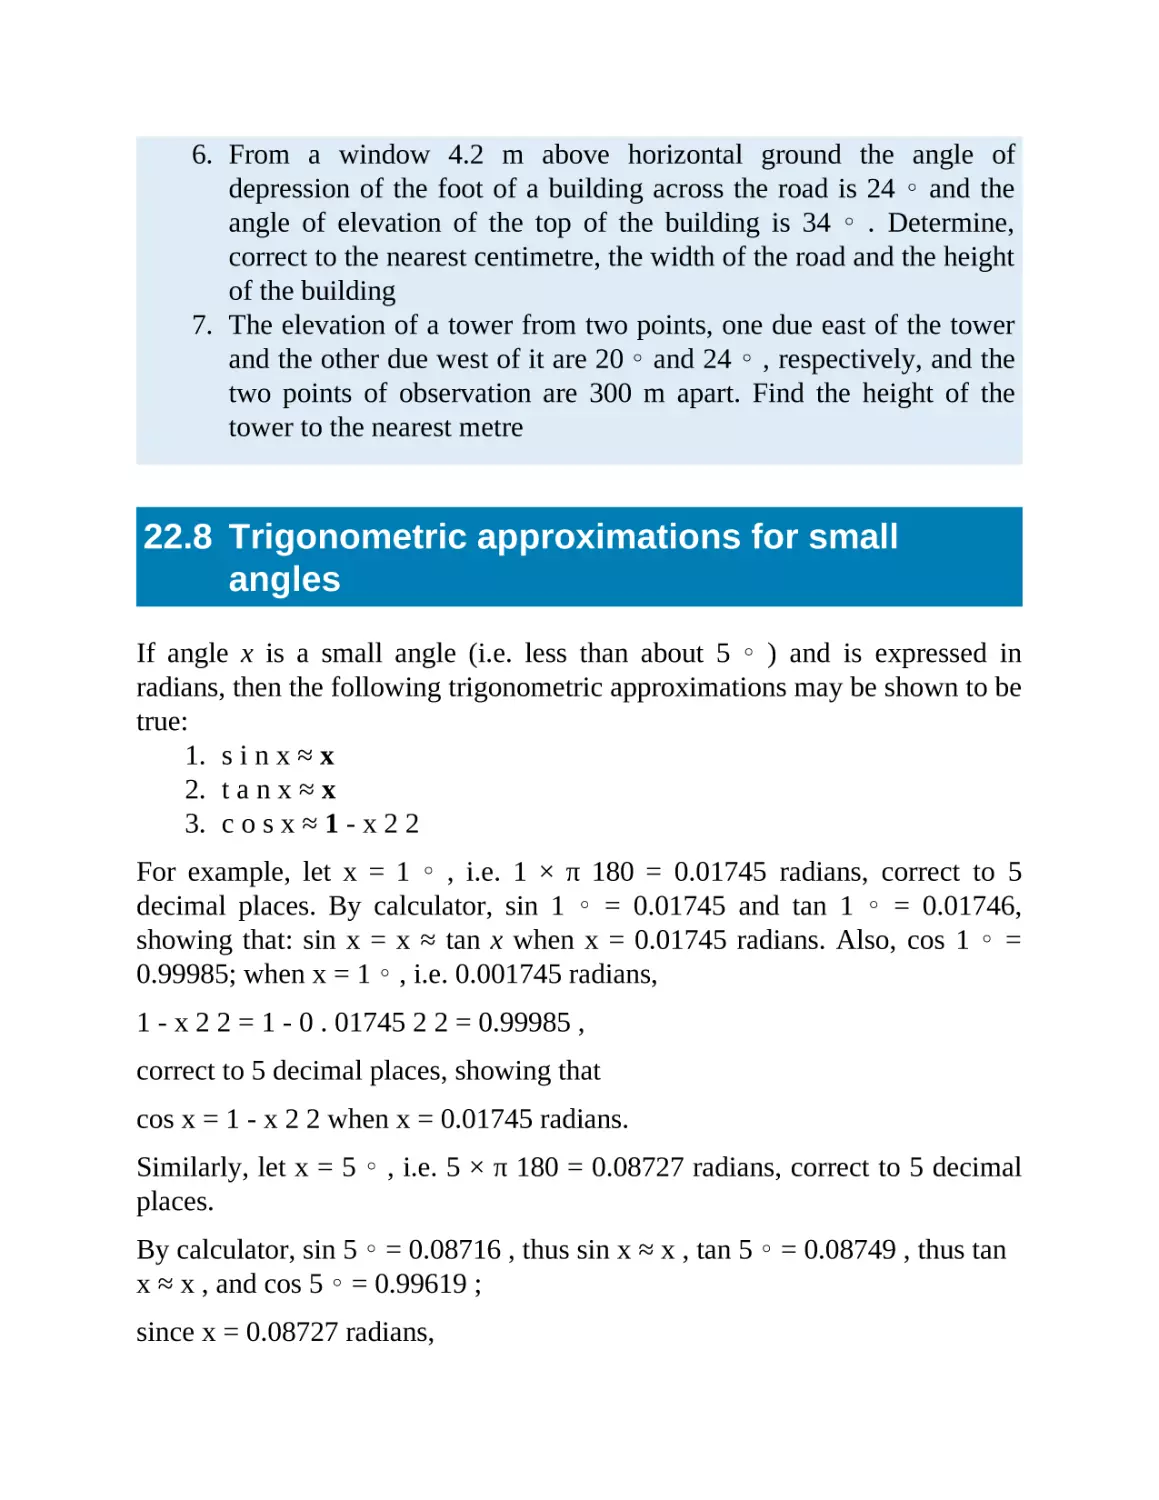 22.8 Trigonometric approximations for small angles